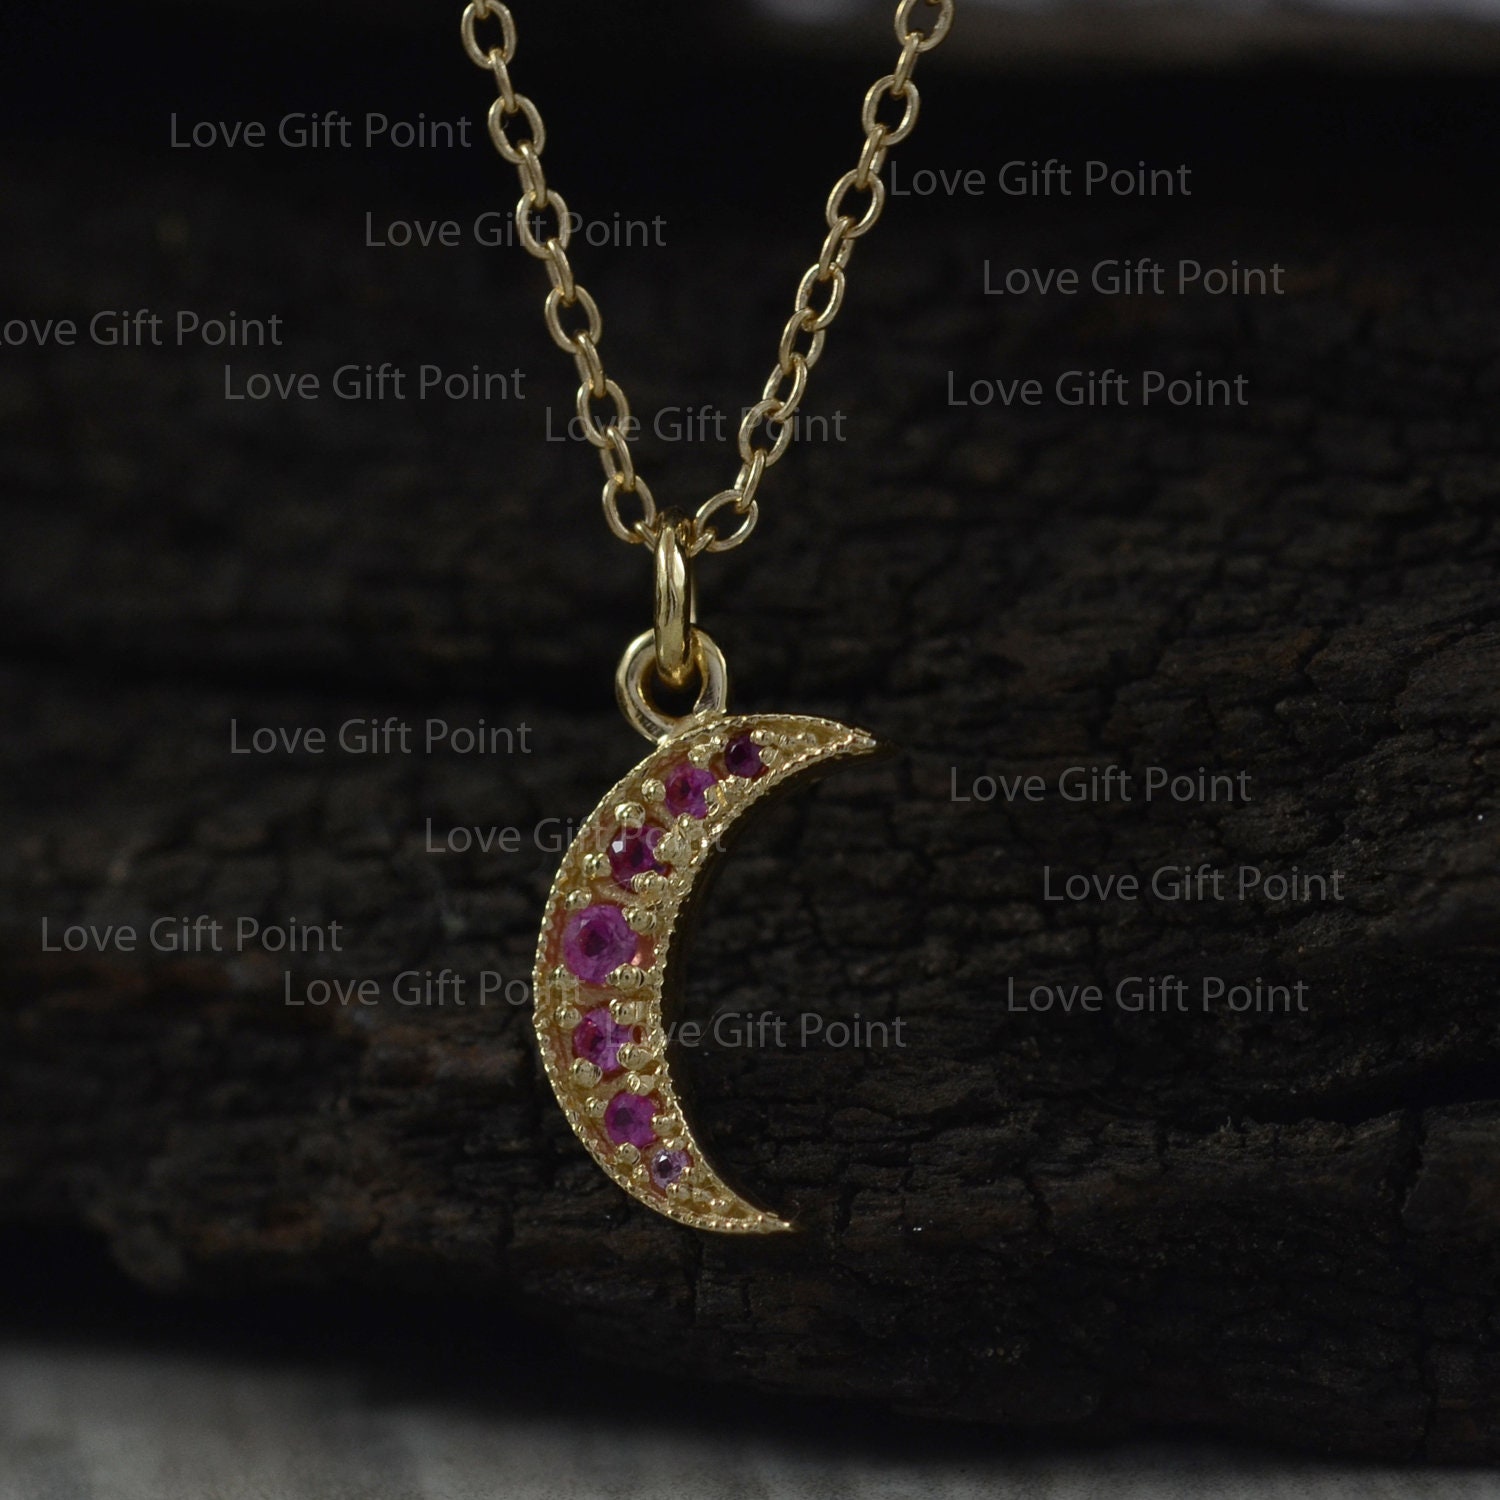 SGFASHIONVAULT Stunning Upside Down Crescent Moon Pendant Gold-plated  Stainless Steel Pendant Price in India - Buy SGFASHIONVAULT Stunning Upside  Down Crescent Moon Pendant Gold-plated Stainless Steel Pendant Online at  Best Prices in